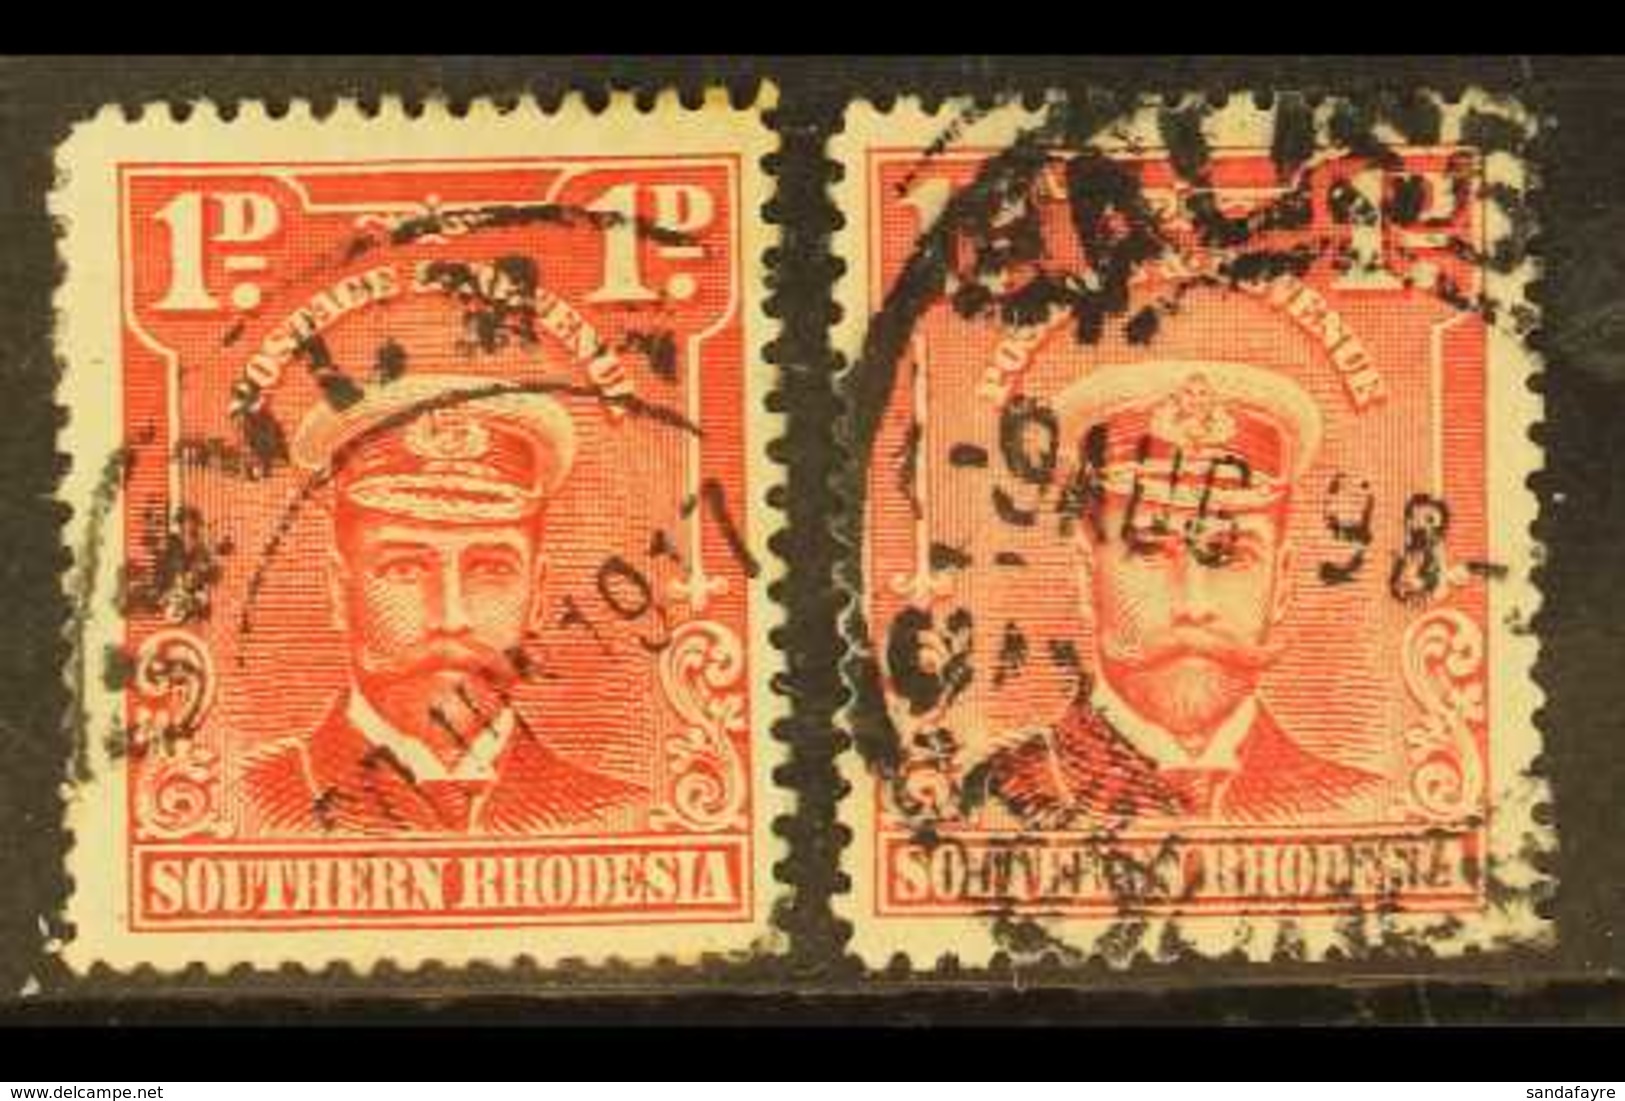 1924 CANCELLATION ERRORS Two 1d Bright Rose Stamps, SG 2, One With "1917" Year Date, The Other With "-9 AUG 98" Date (2) - Southern Rhodesia (...-1964)